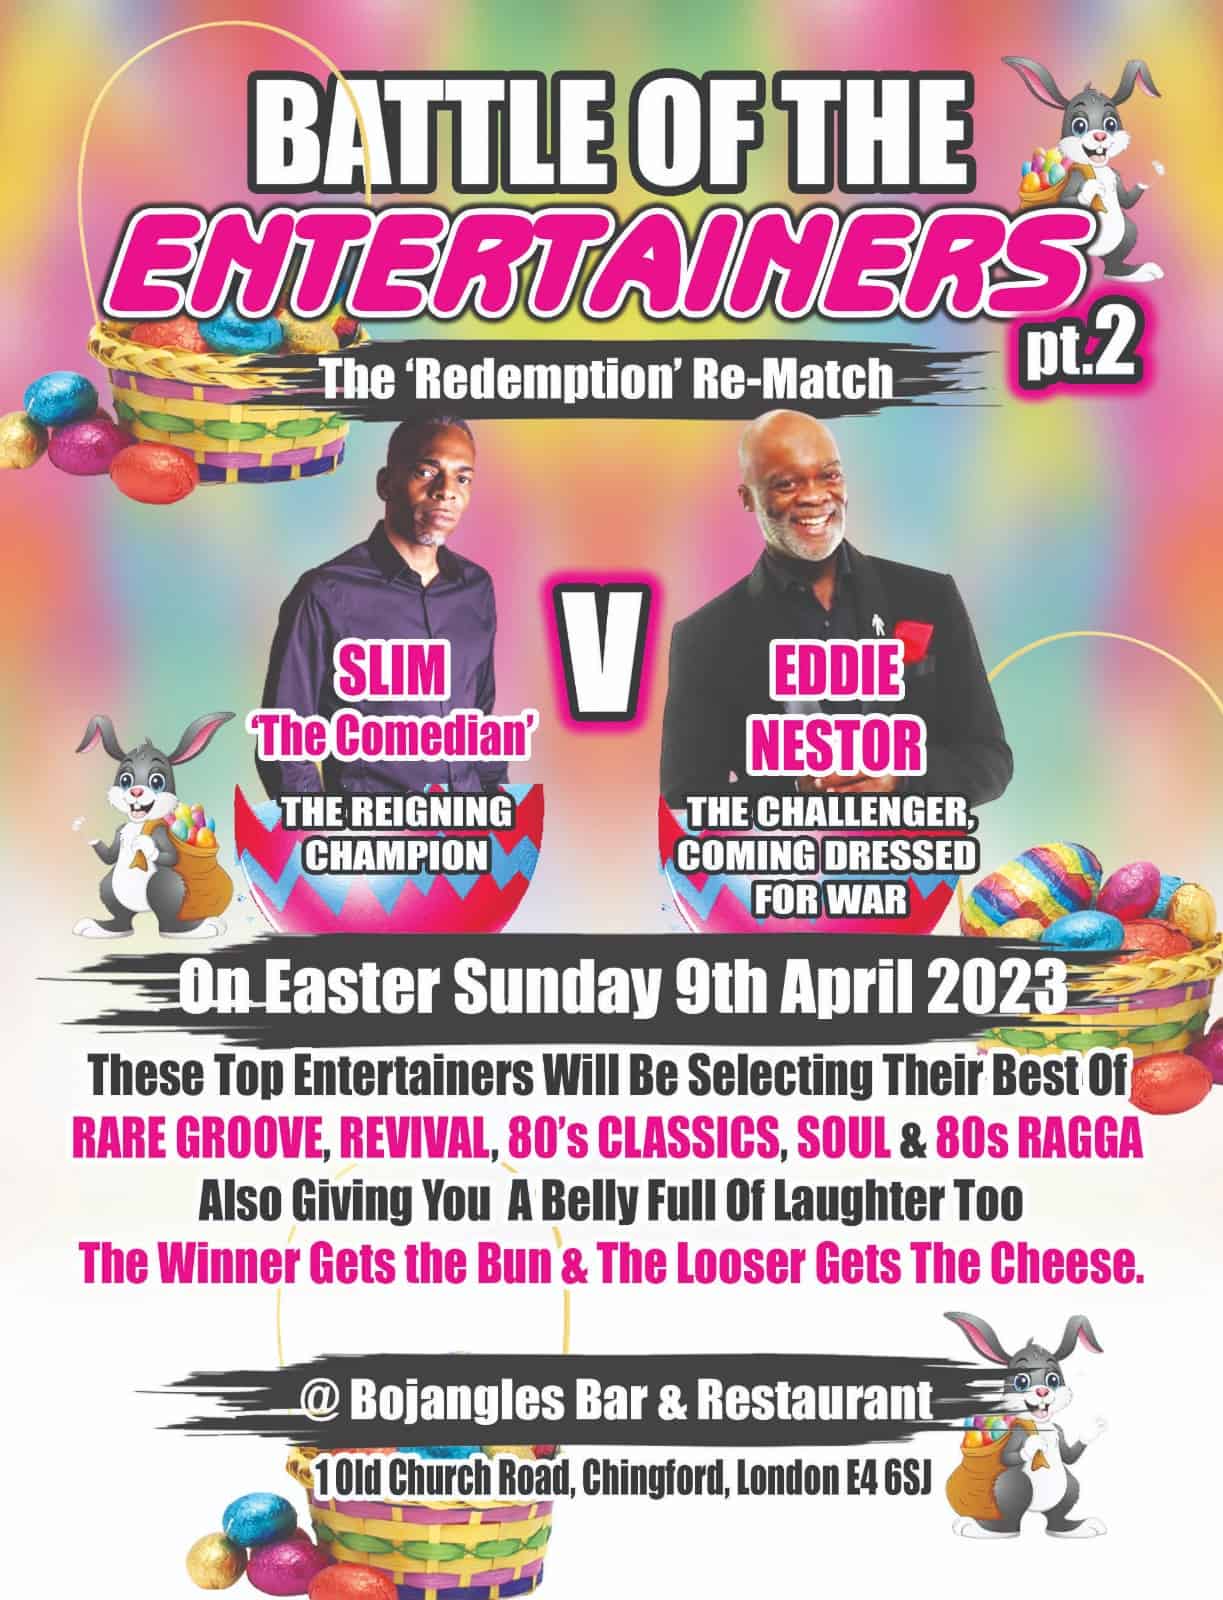 Battle of the Entertainers Pt.2 : The Redemption Re-Match - Club Night in Chingford